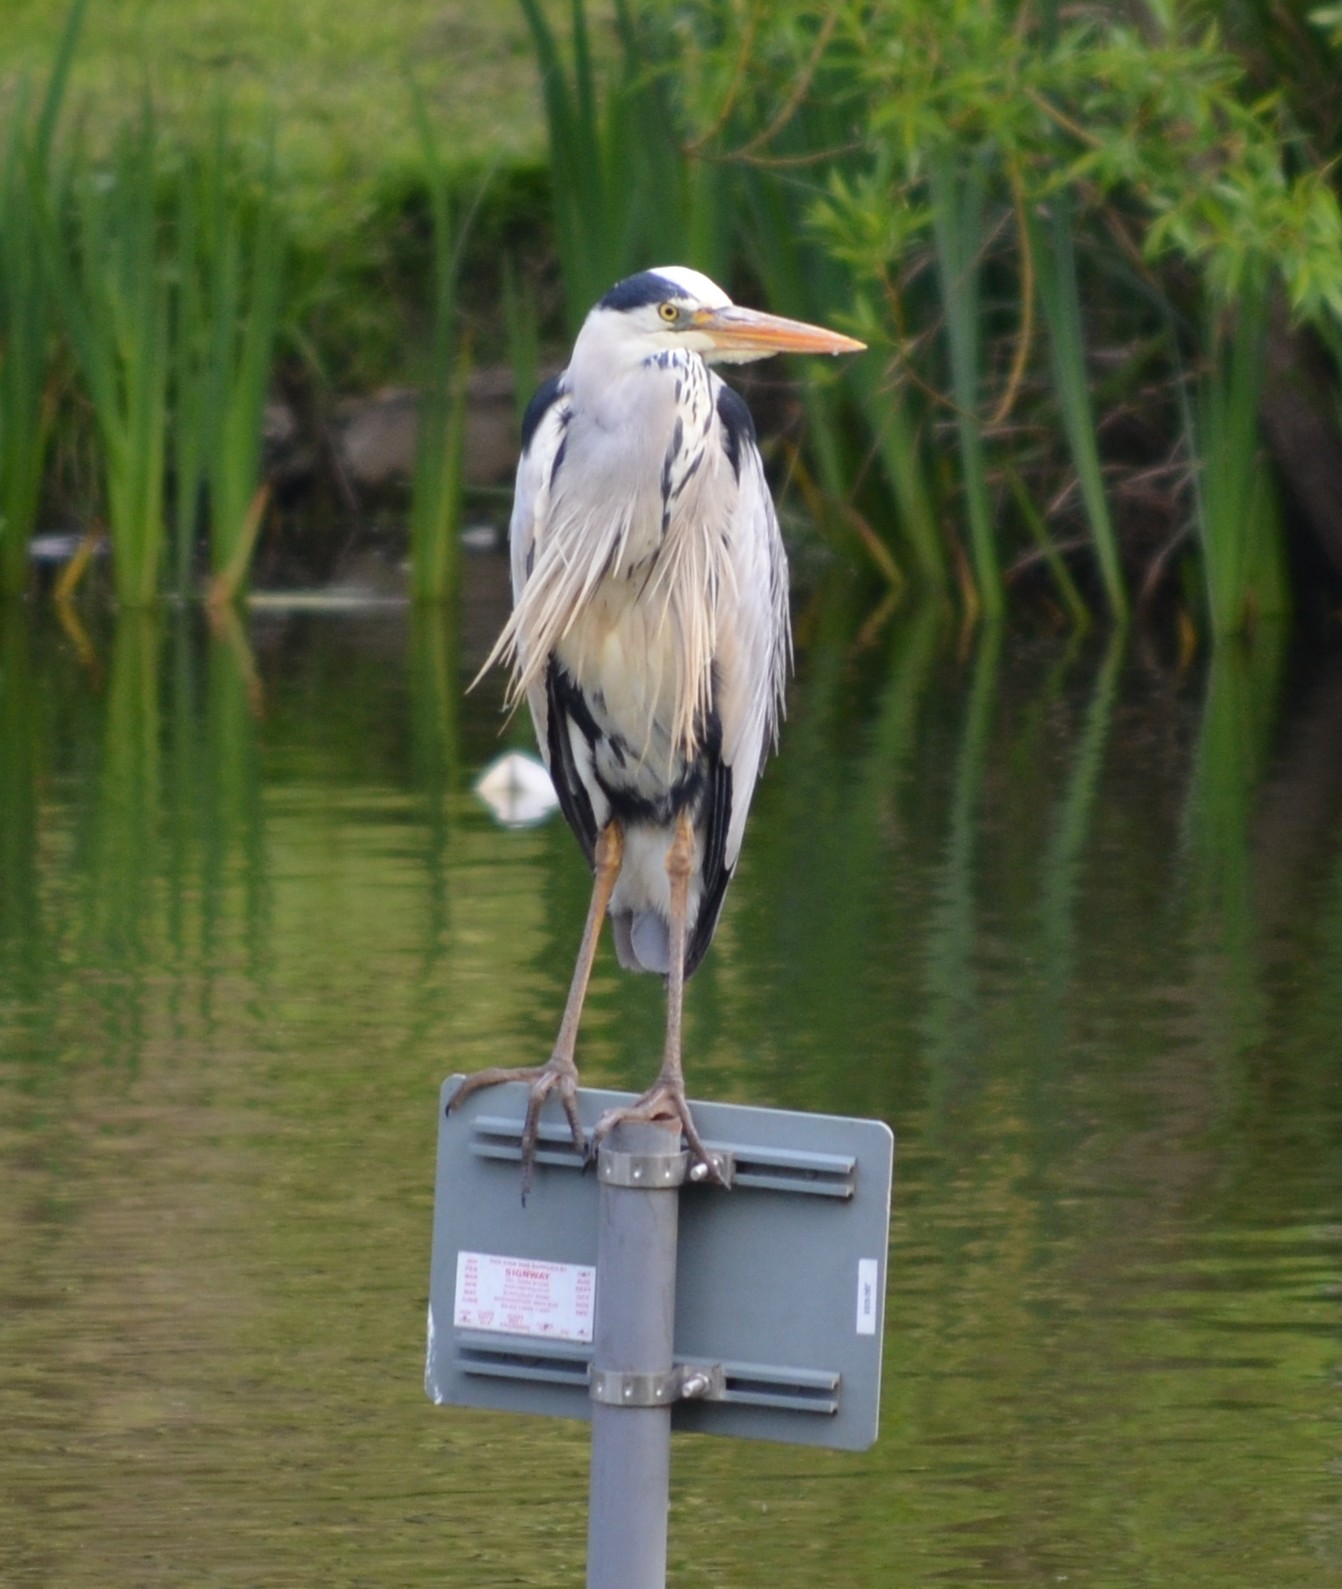 I think we had a new visitor.  This heron just didn't look like the one we have seen around the pond of late